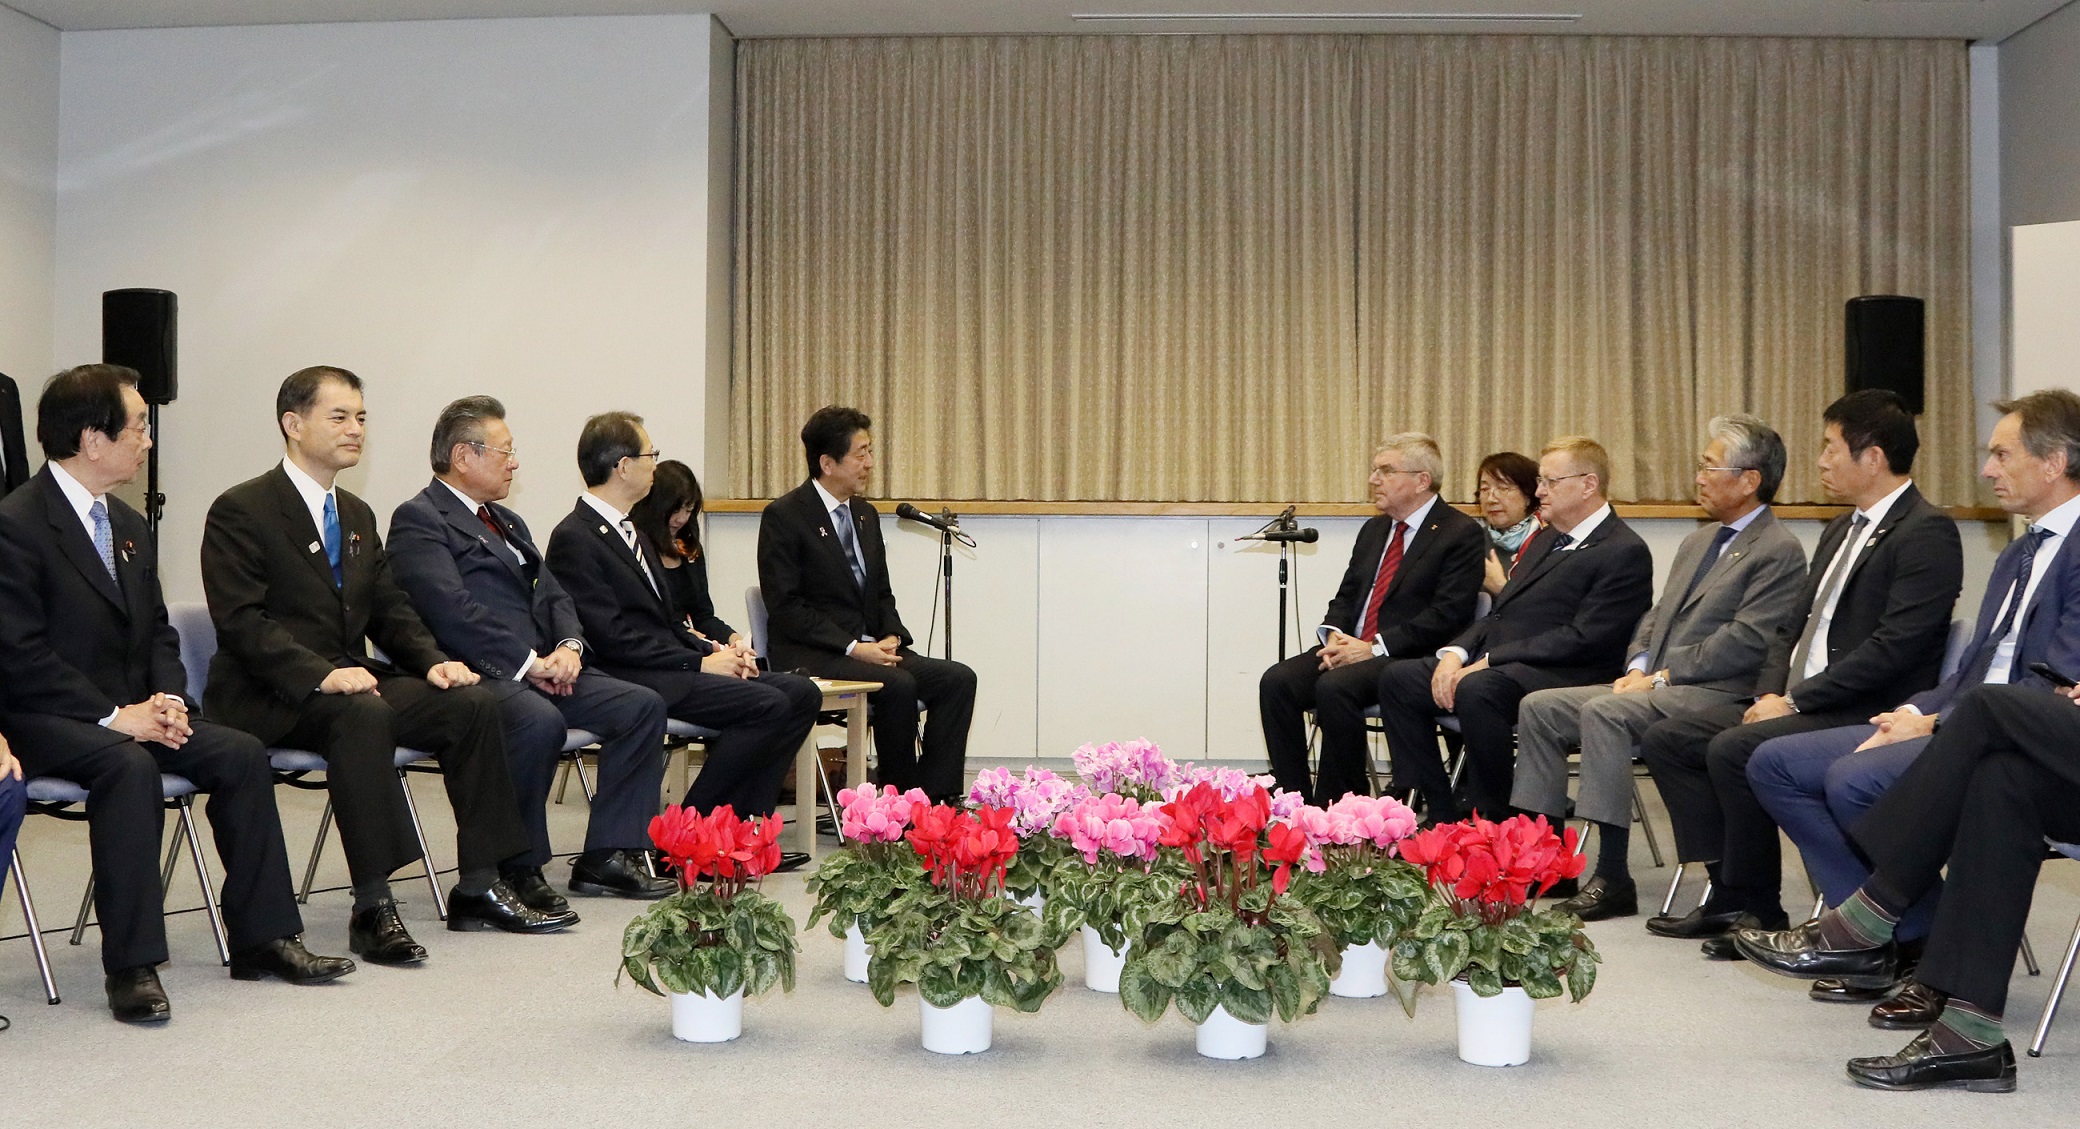 Photograph of the Prime Minister meeting with the President of the IOC